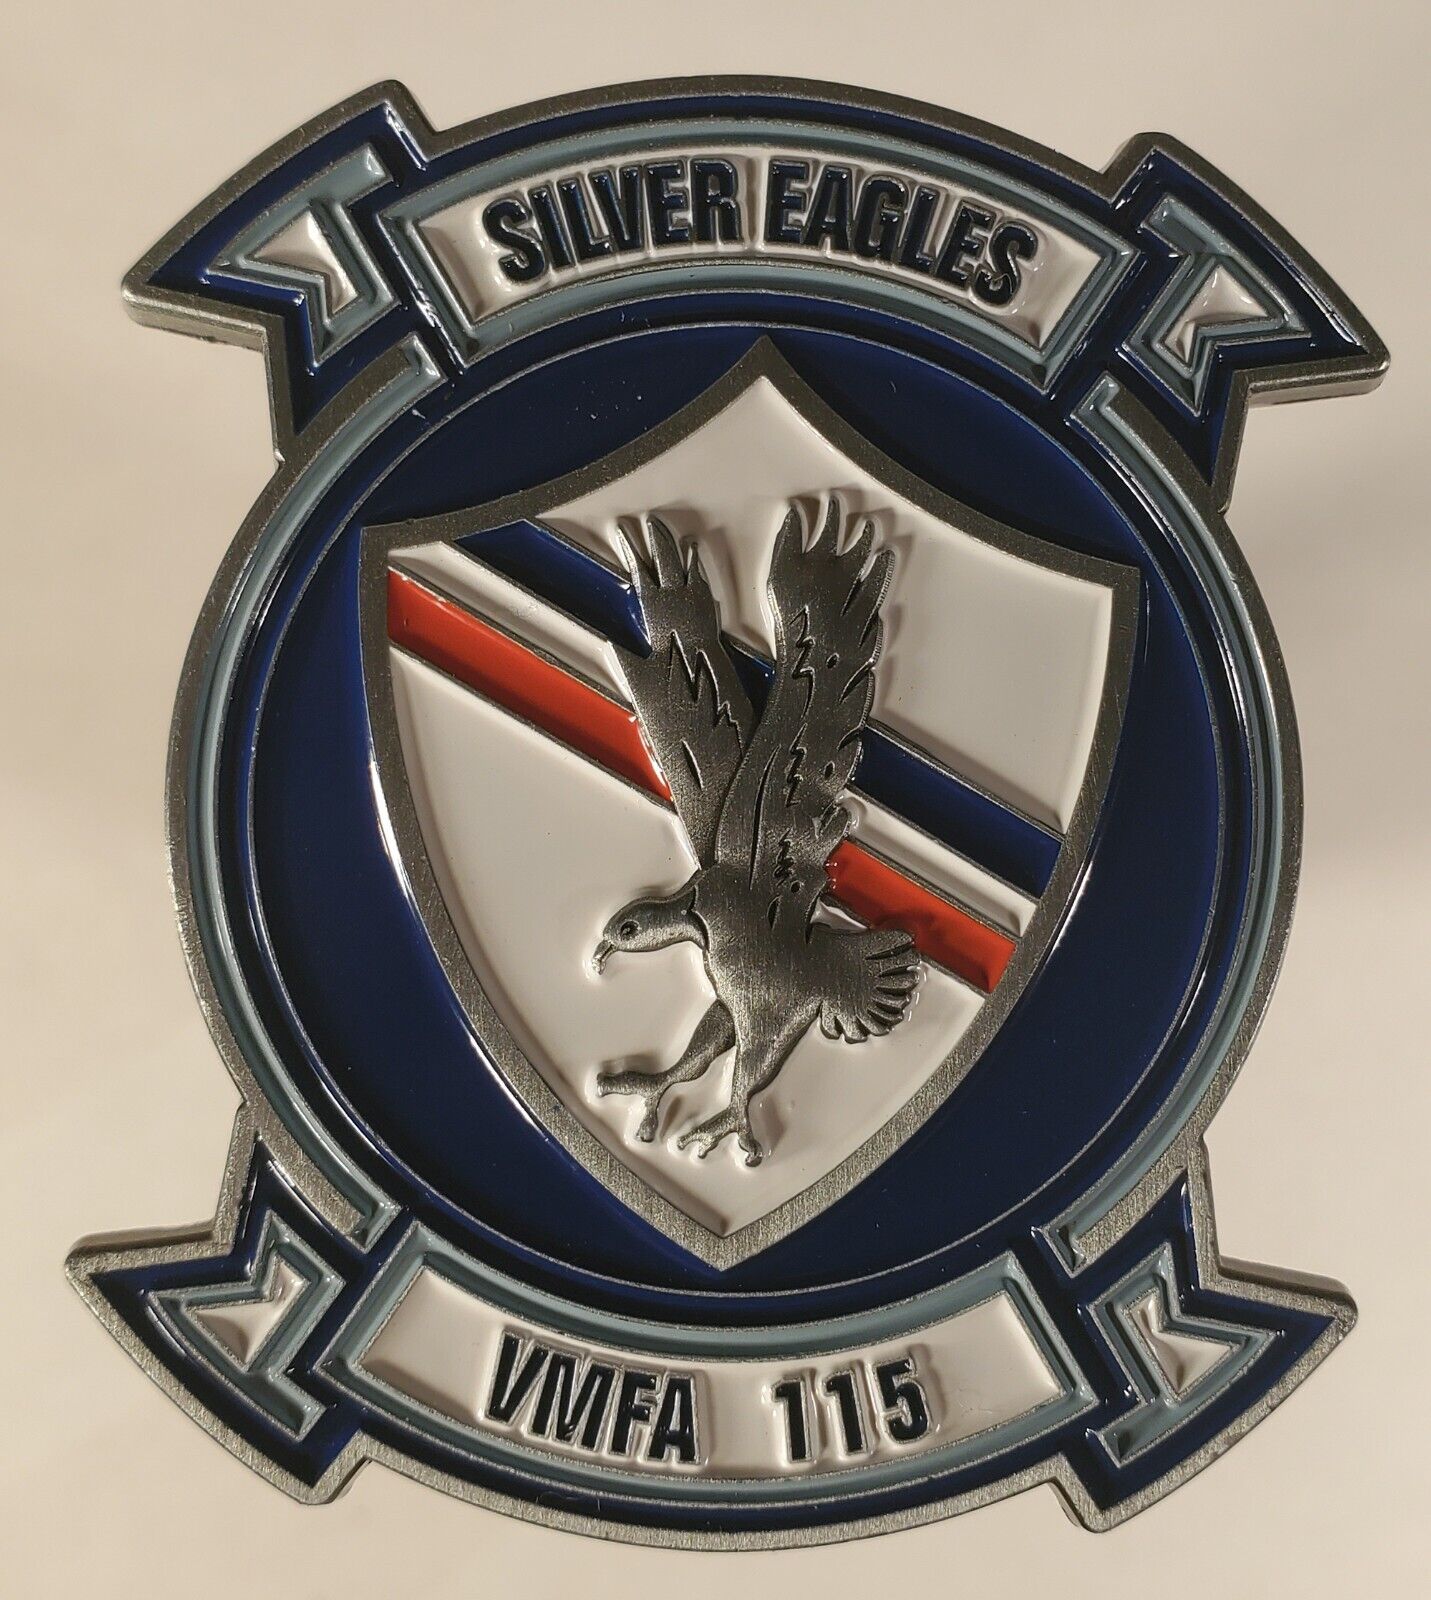 US MARINES VMFA 115 SILVER EAGLES CHALLENGE COIN 2